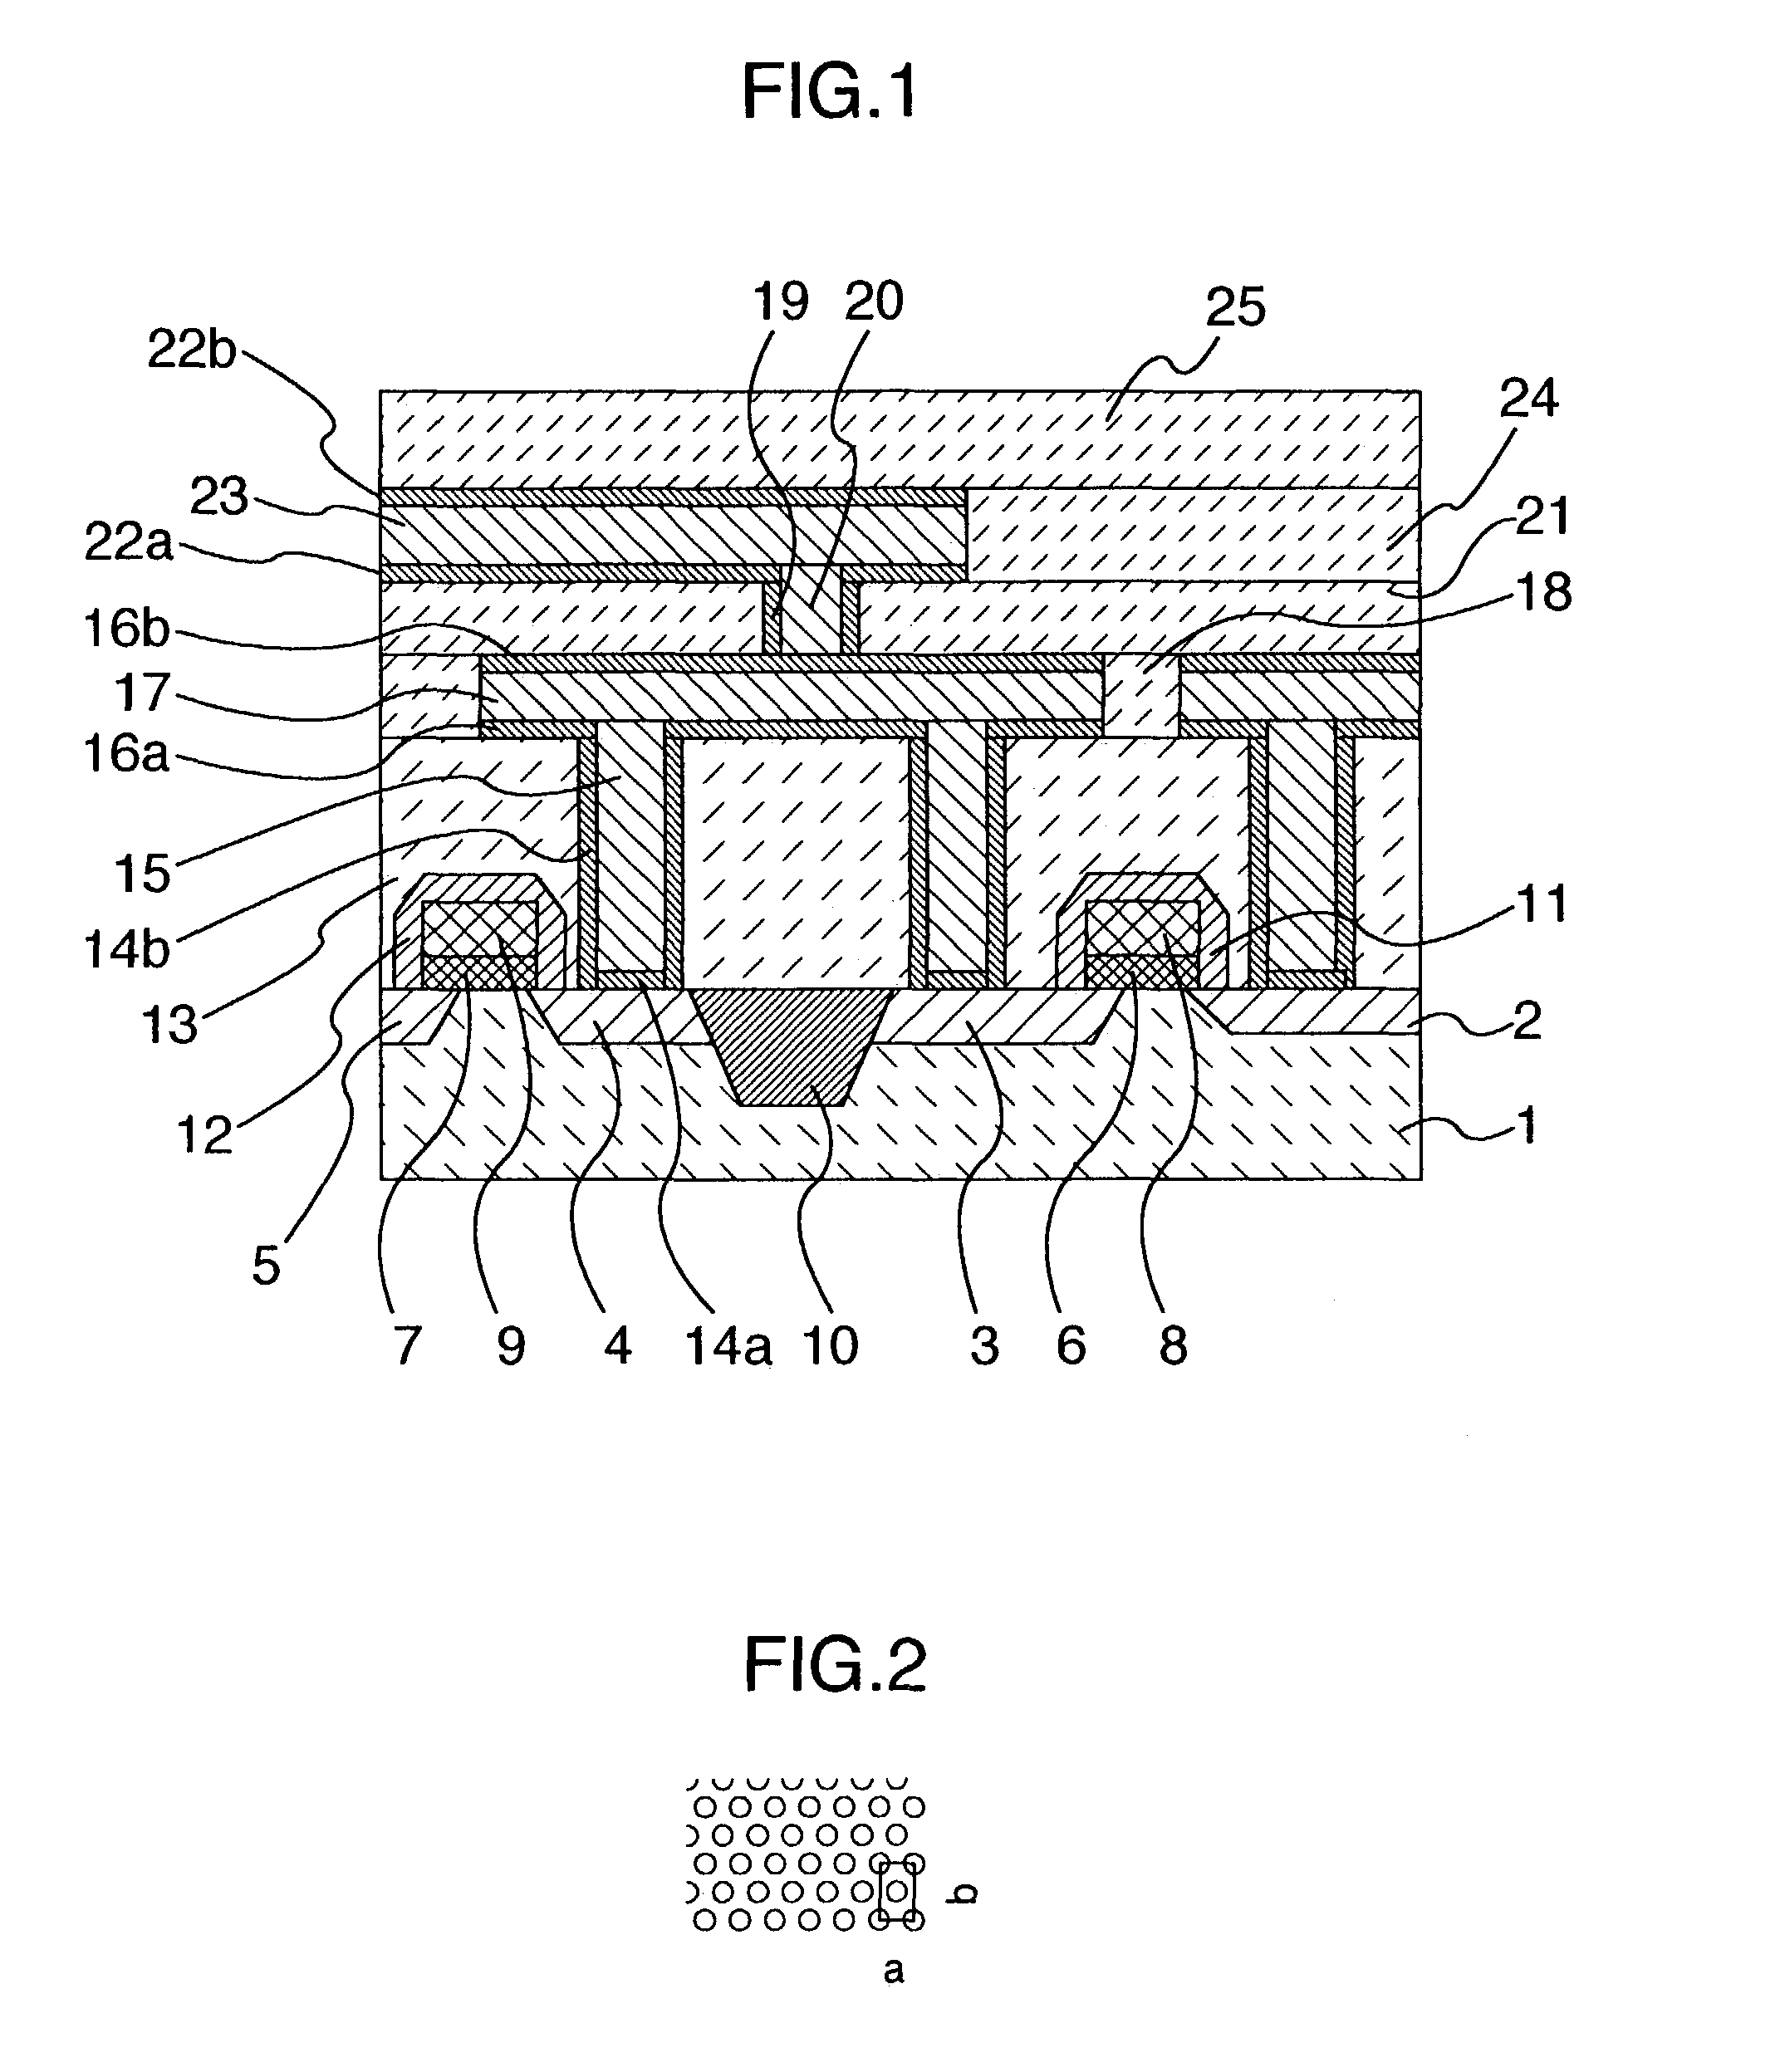 Semiconductor device with multilayer conductive structure formed on a semiconductor substrate